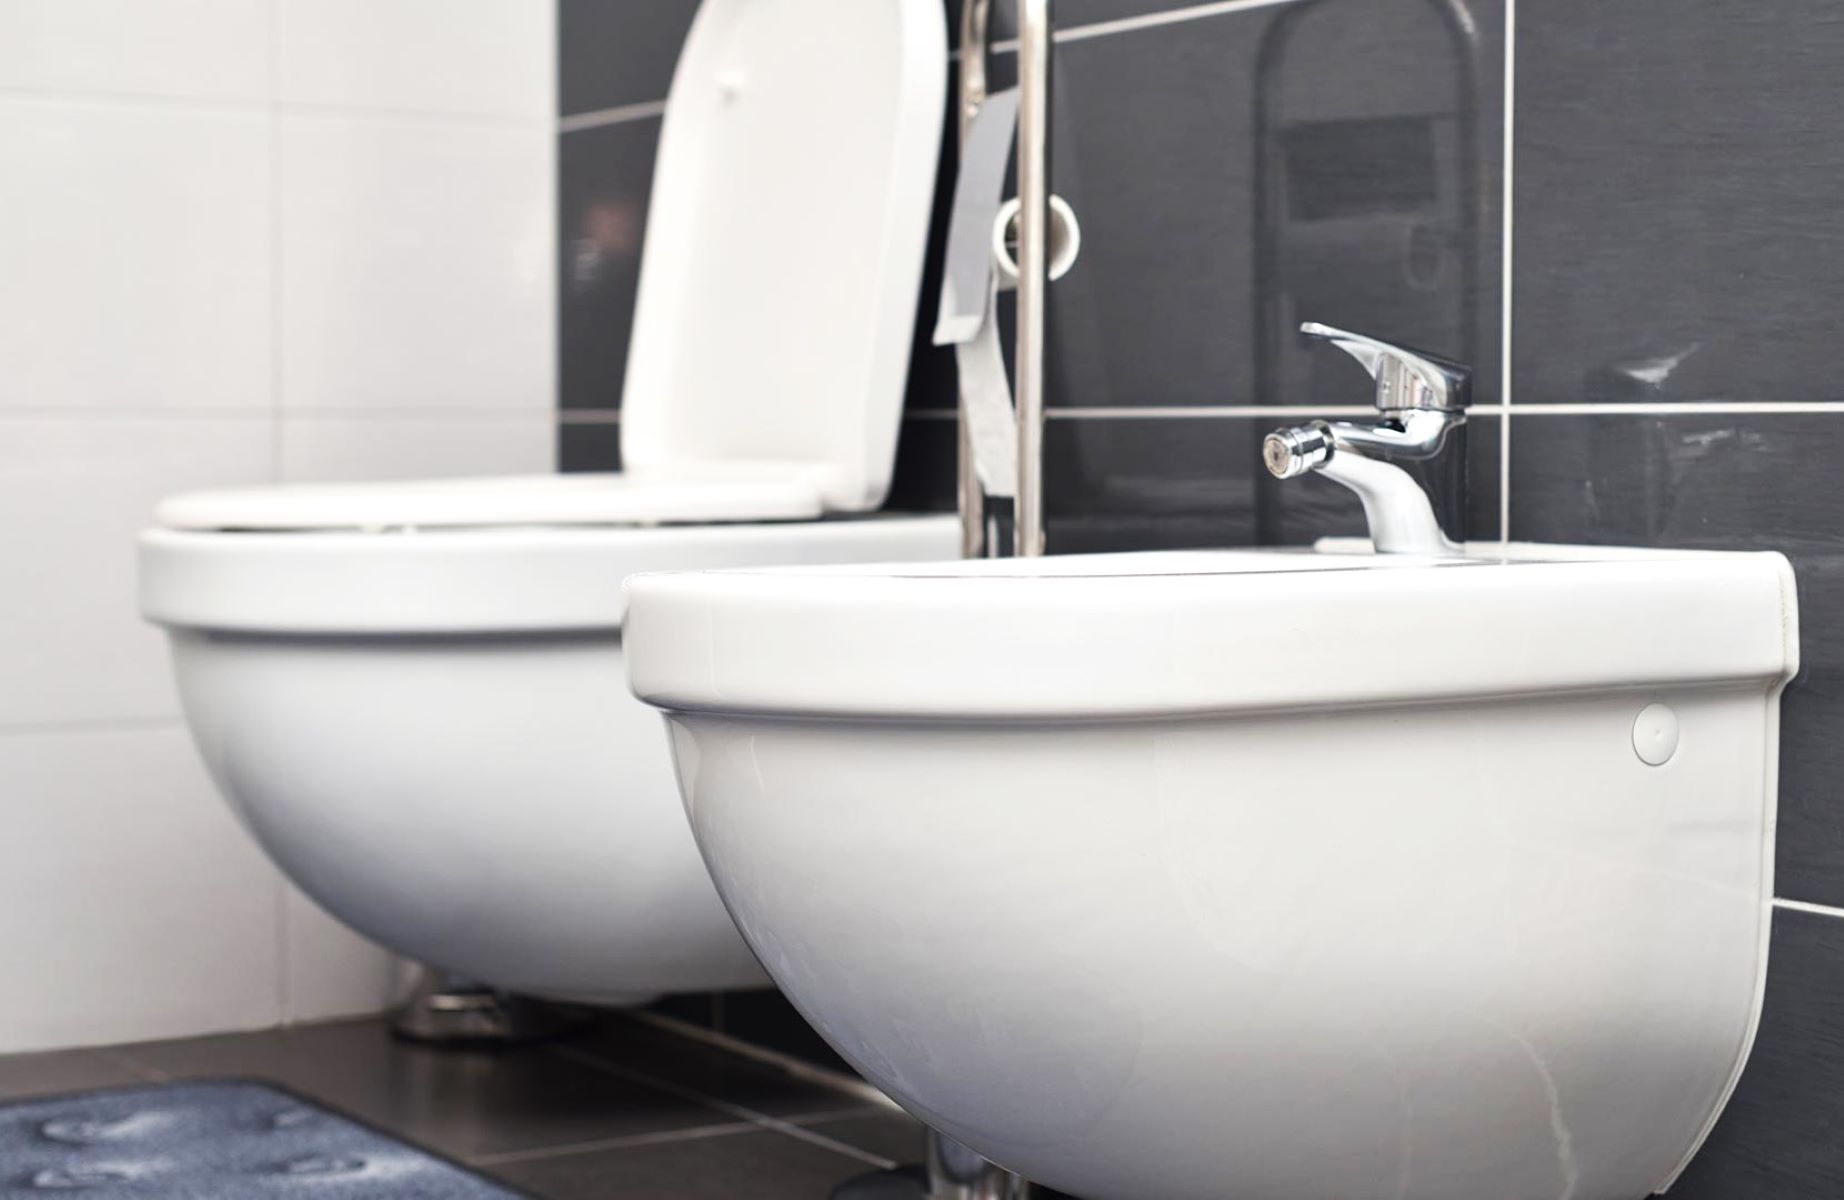 How To Use A Standalone Bidet